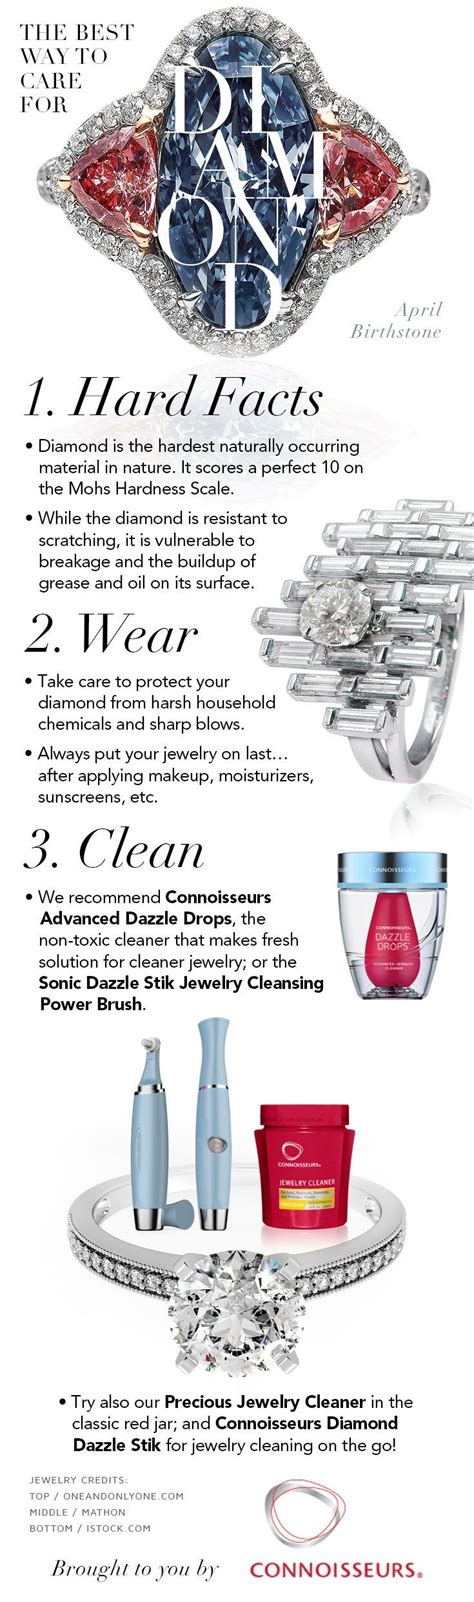 {this will help loosen up the dirt and grime} The best way to clean a diamond #diamonds #engagementrings #bride #keepitclean #cleanyourjewelry ...